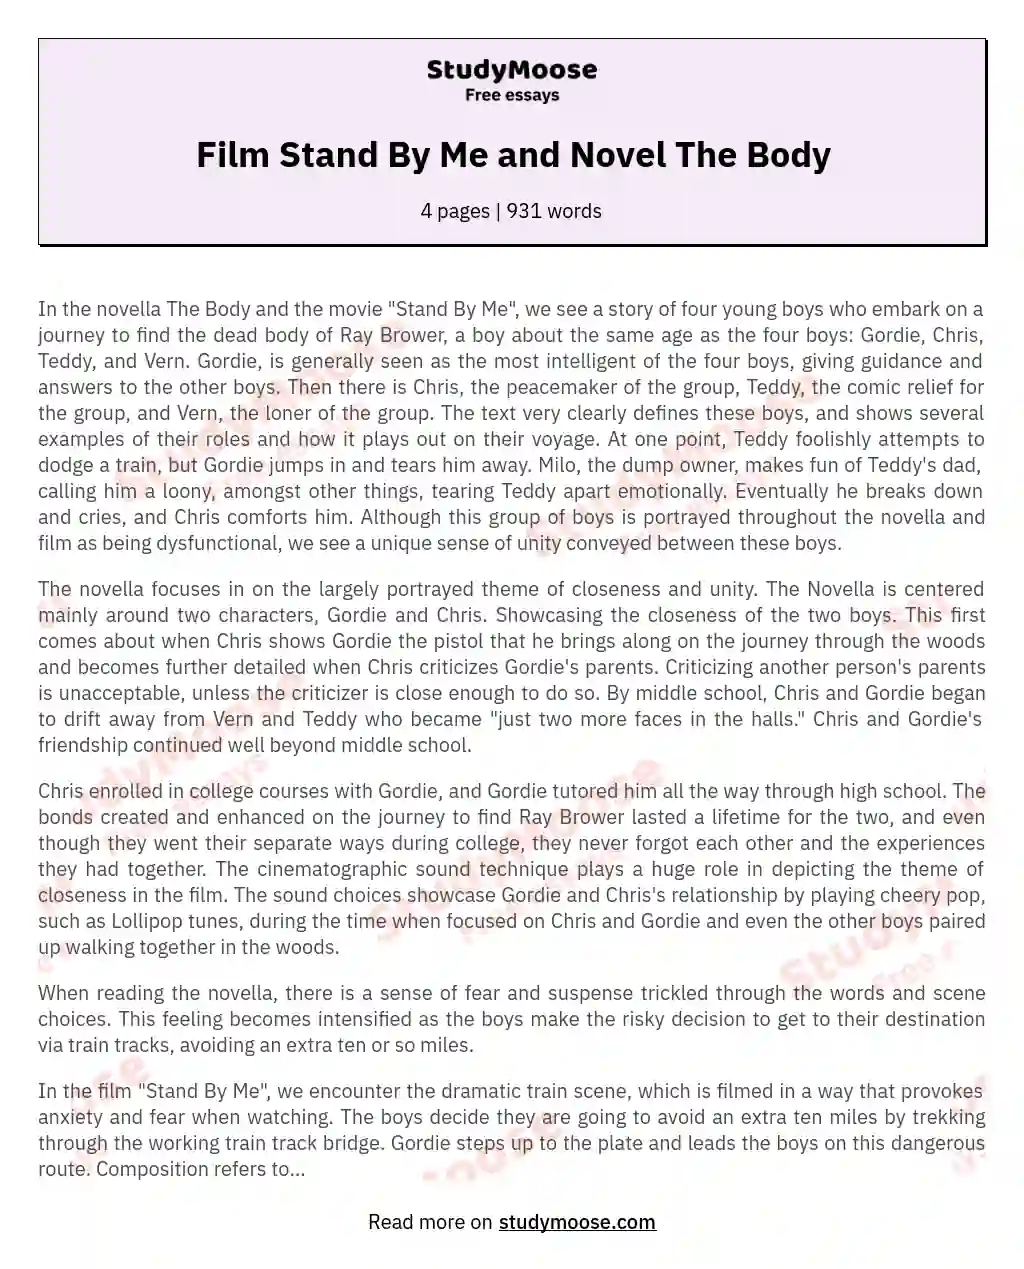 Film Stand By Me and Novel The Body essay